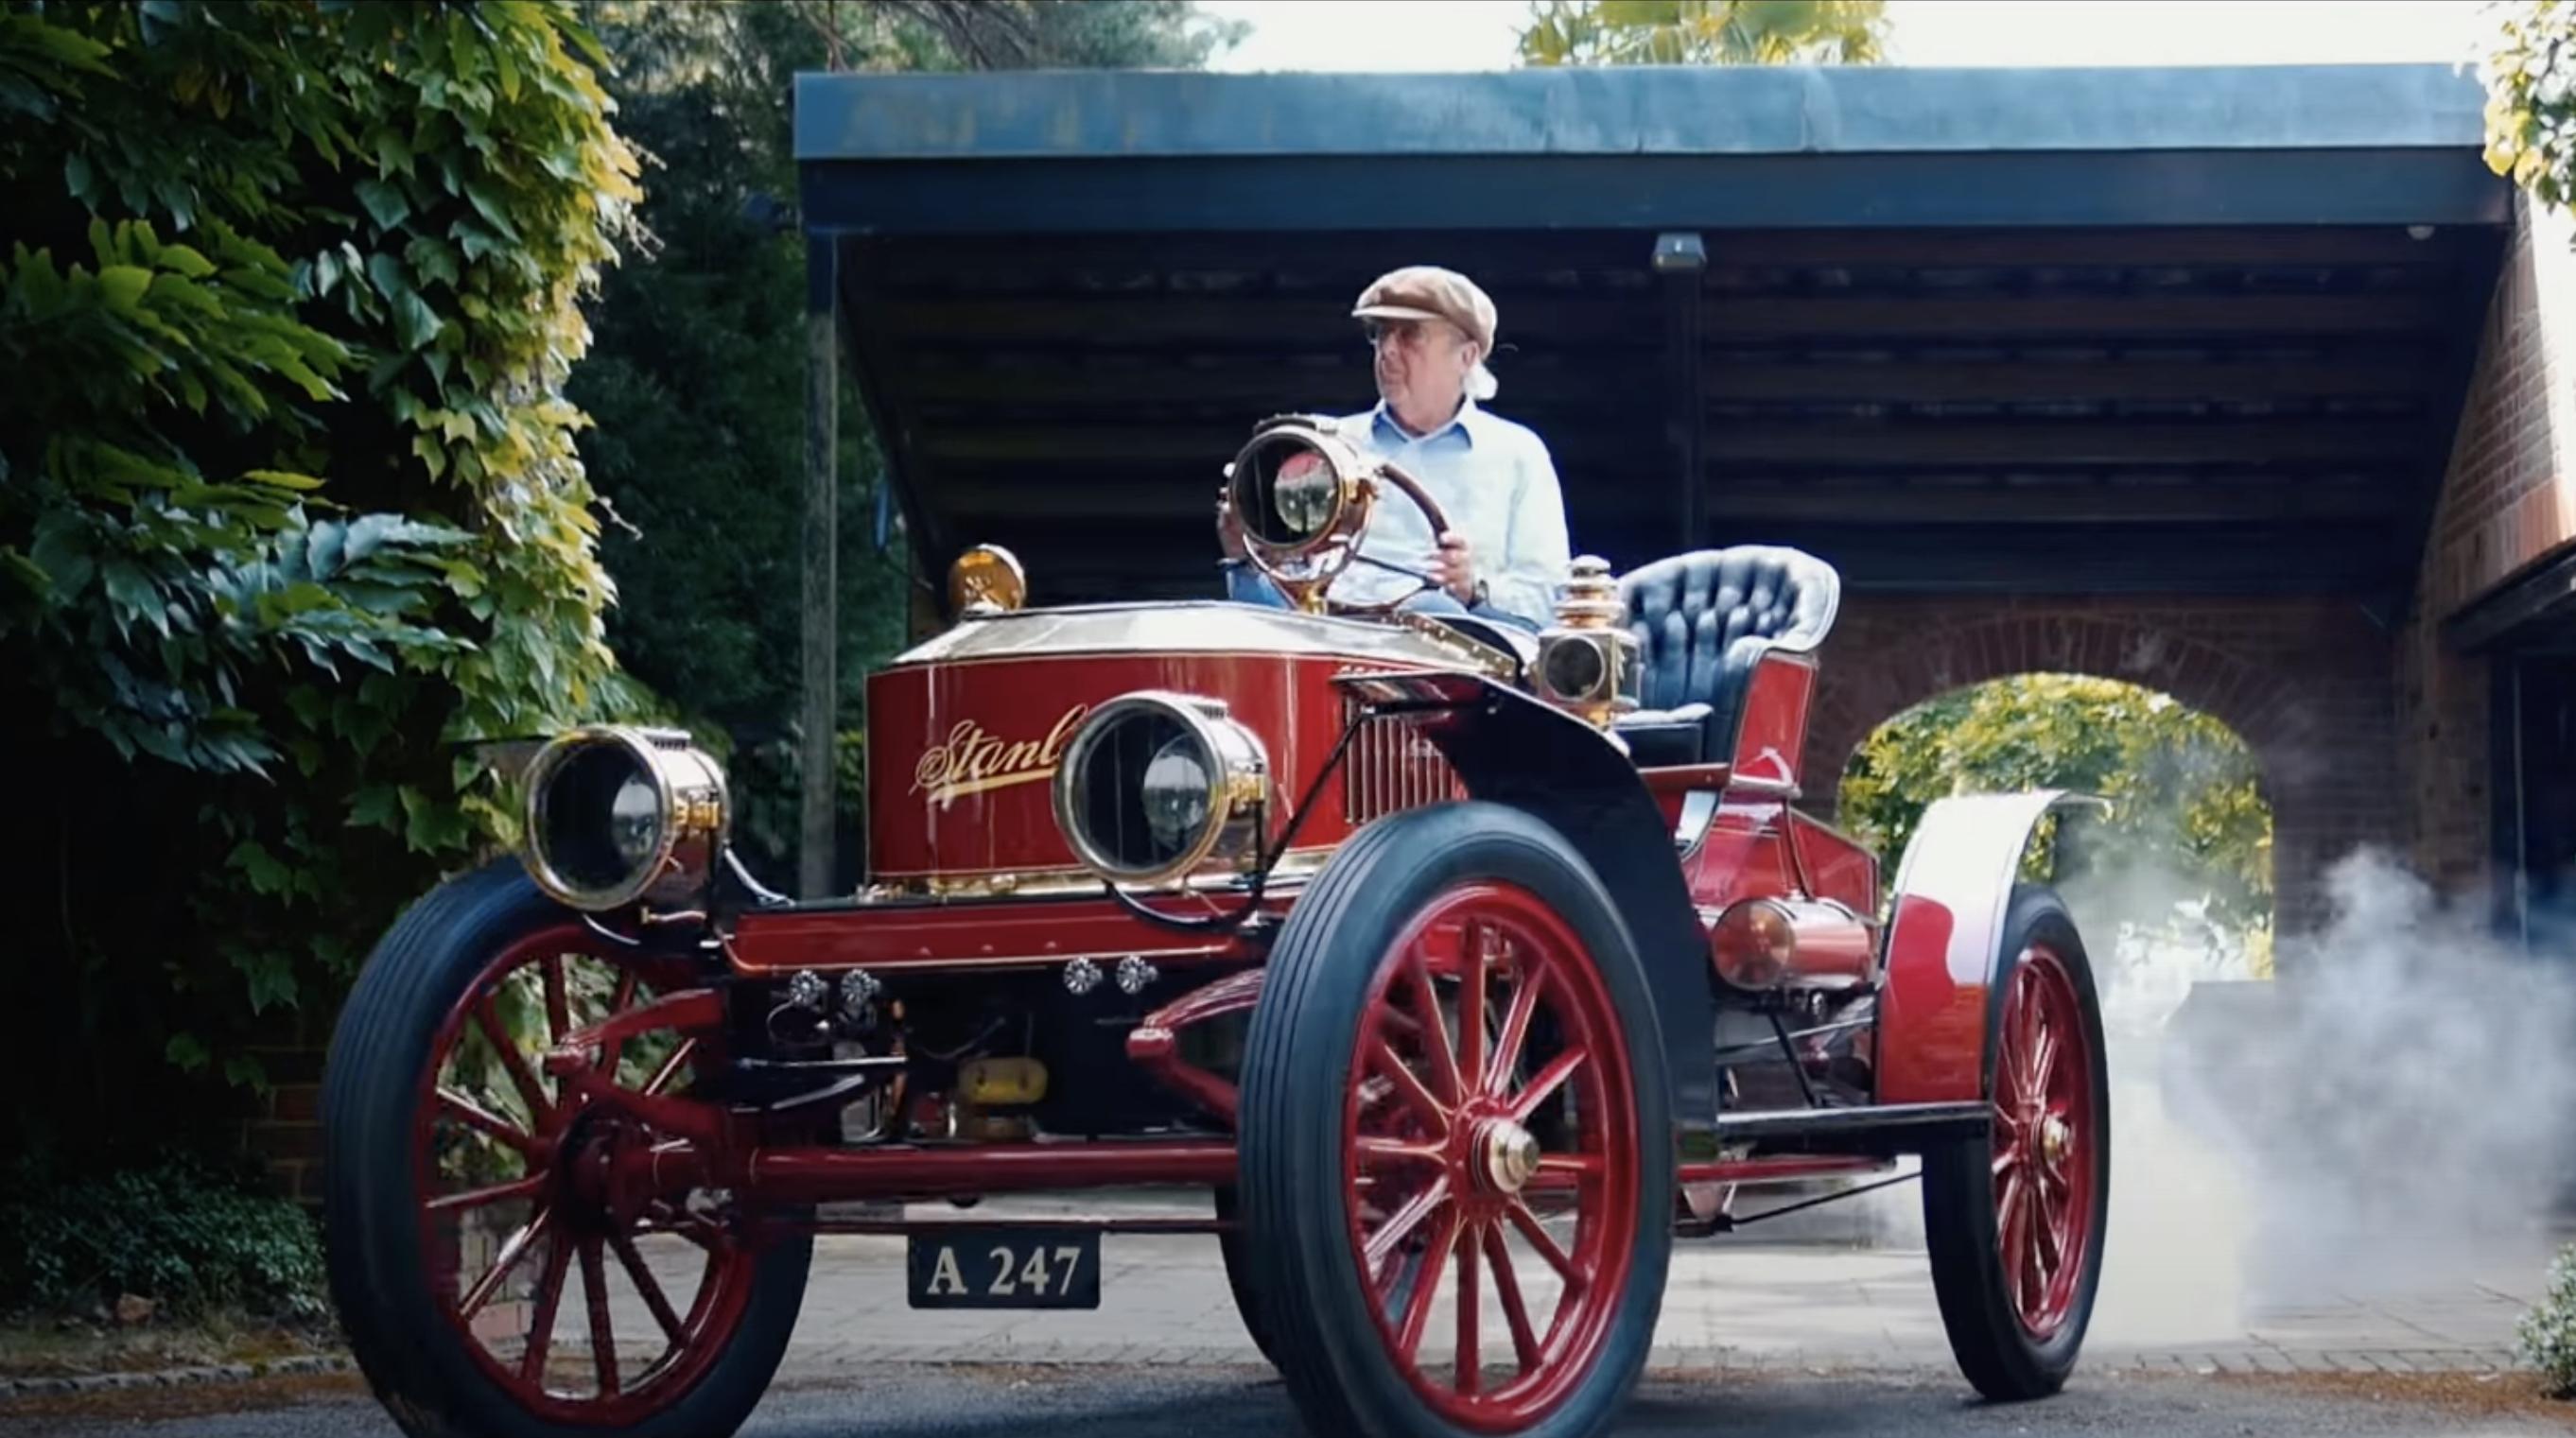 Turn-of-the-century motoring offered steam, gas, and electric cars. How do they hold up a century later?